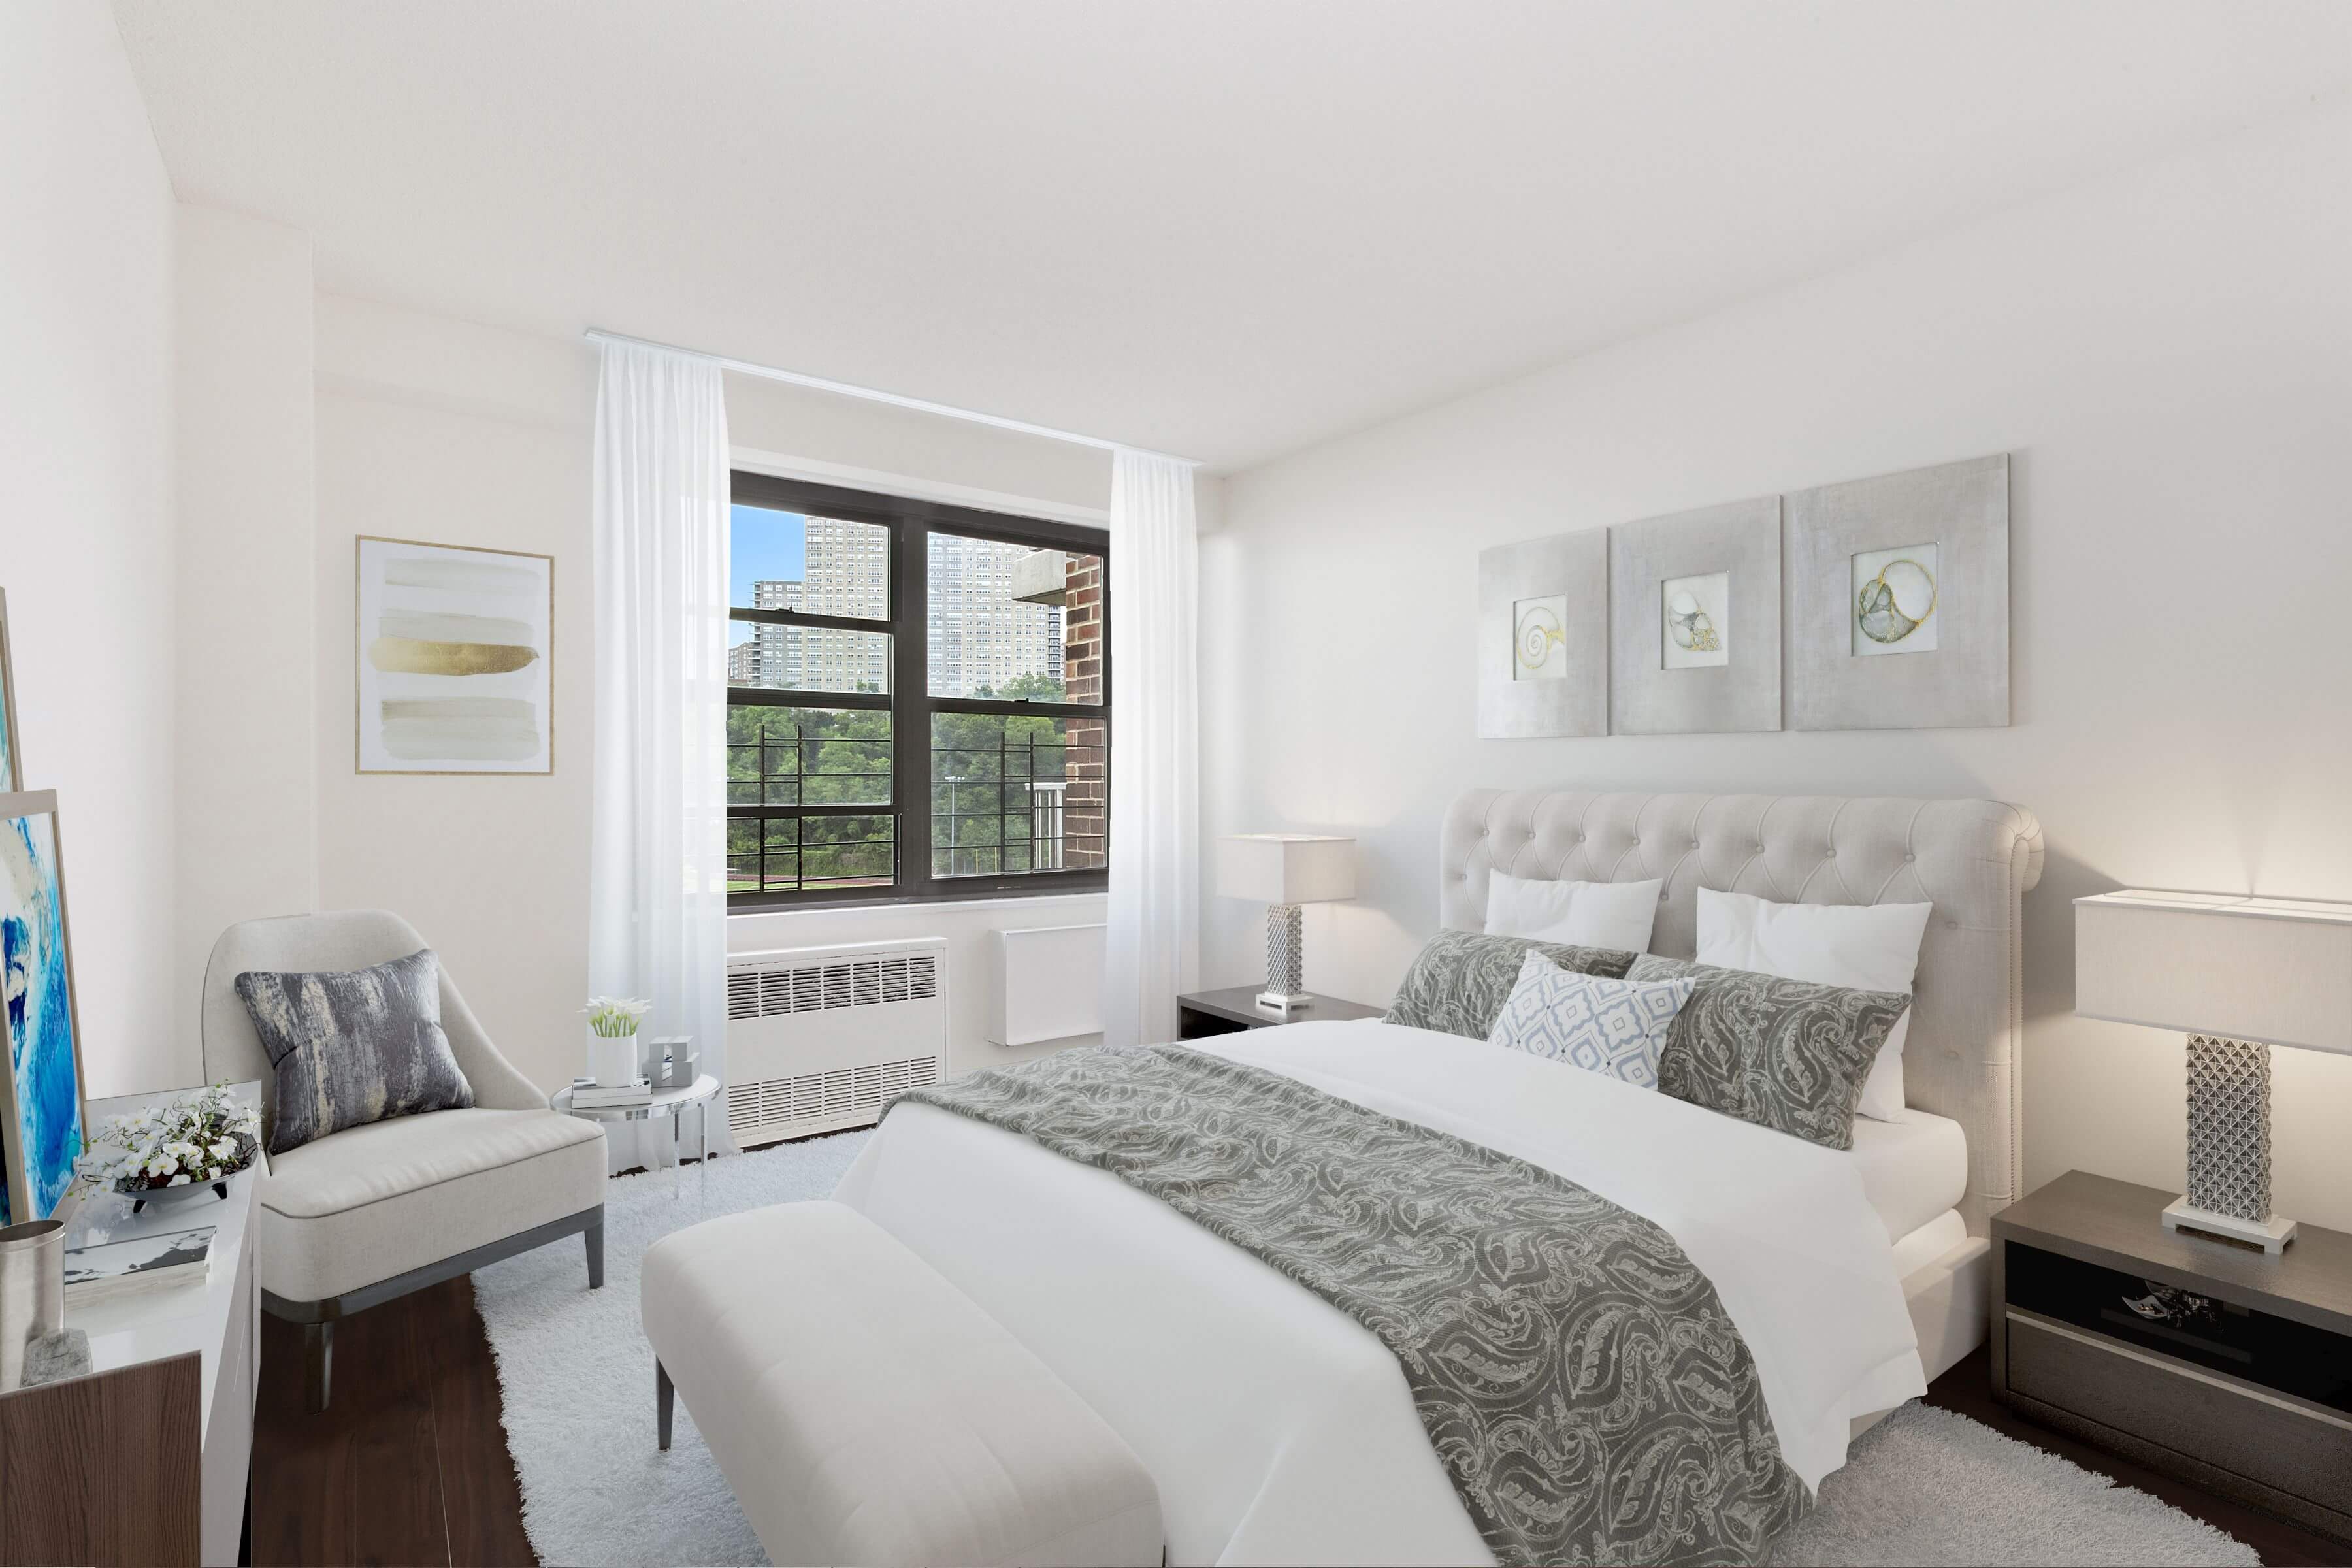 The Promenade Offers master suite that can accommodate king-size bedroom furniture, as seen here.